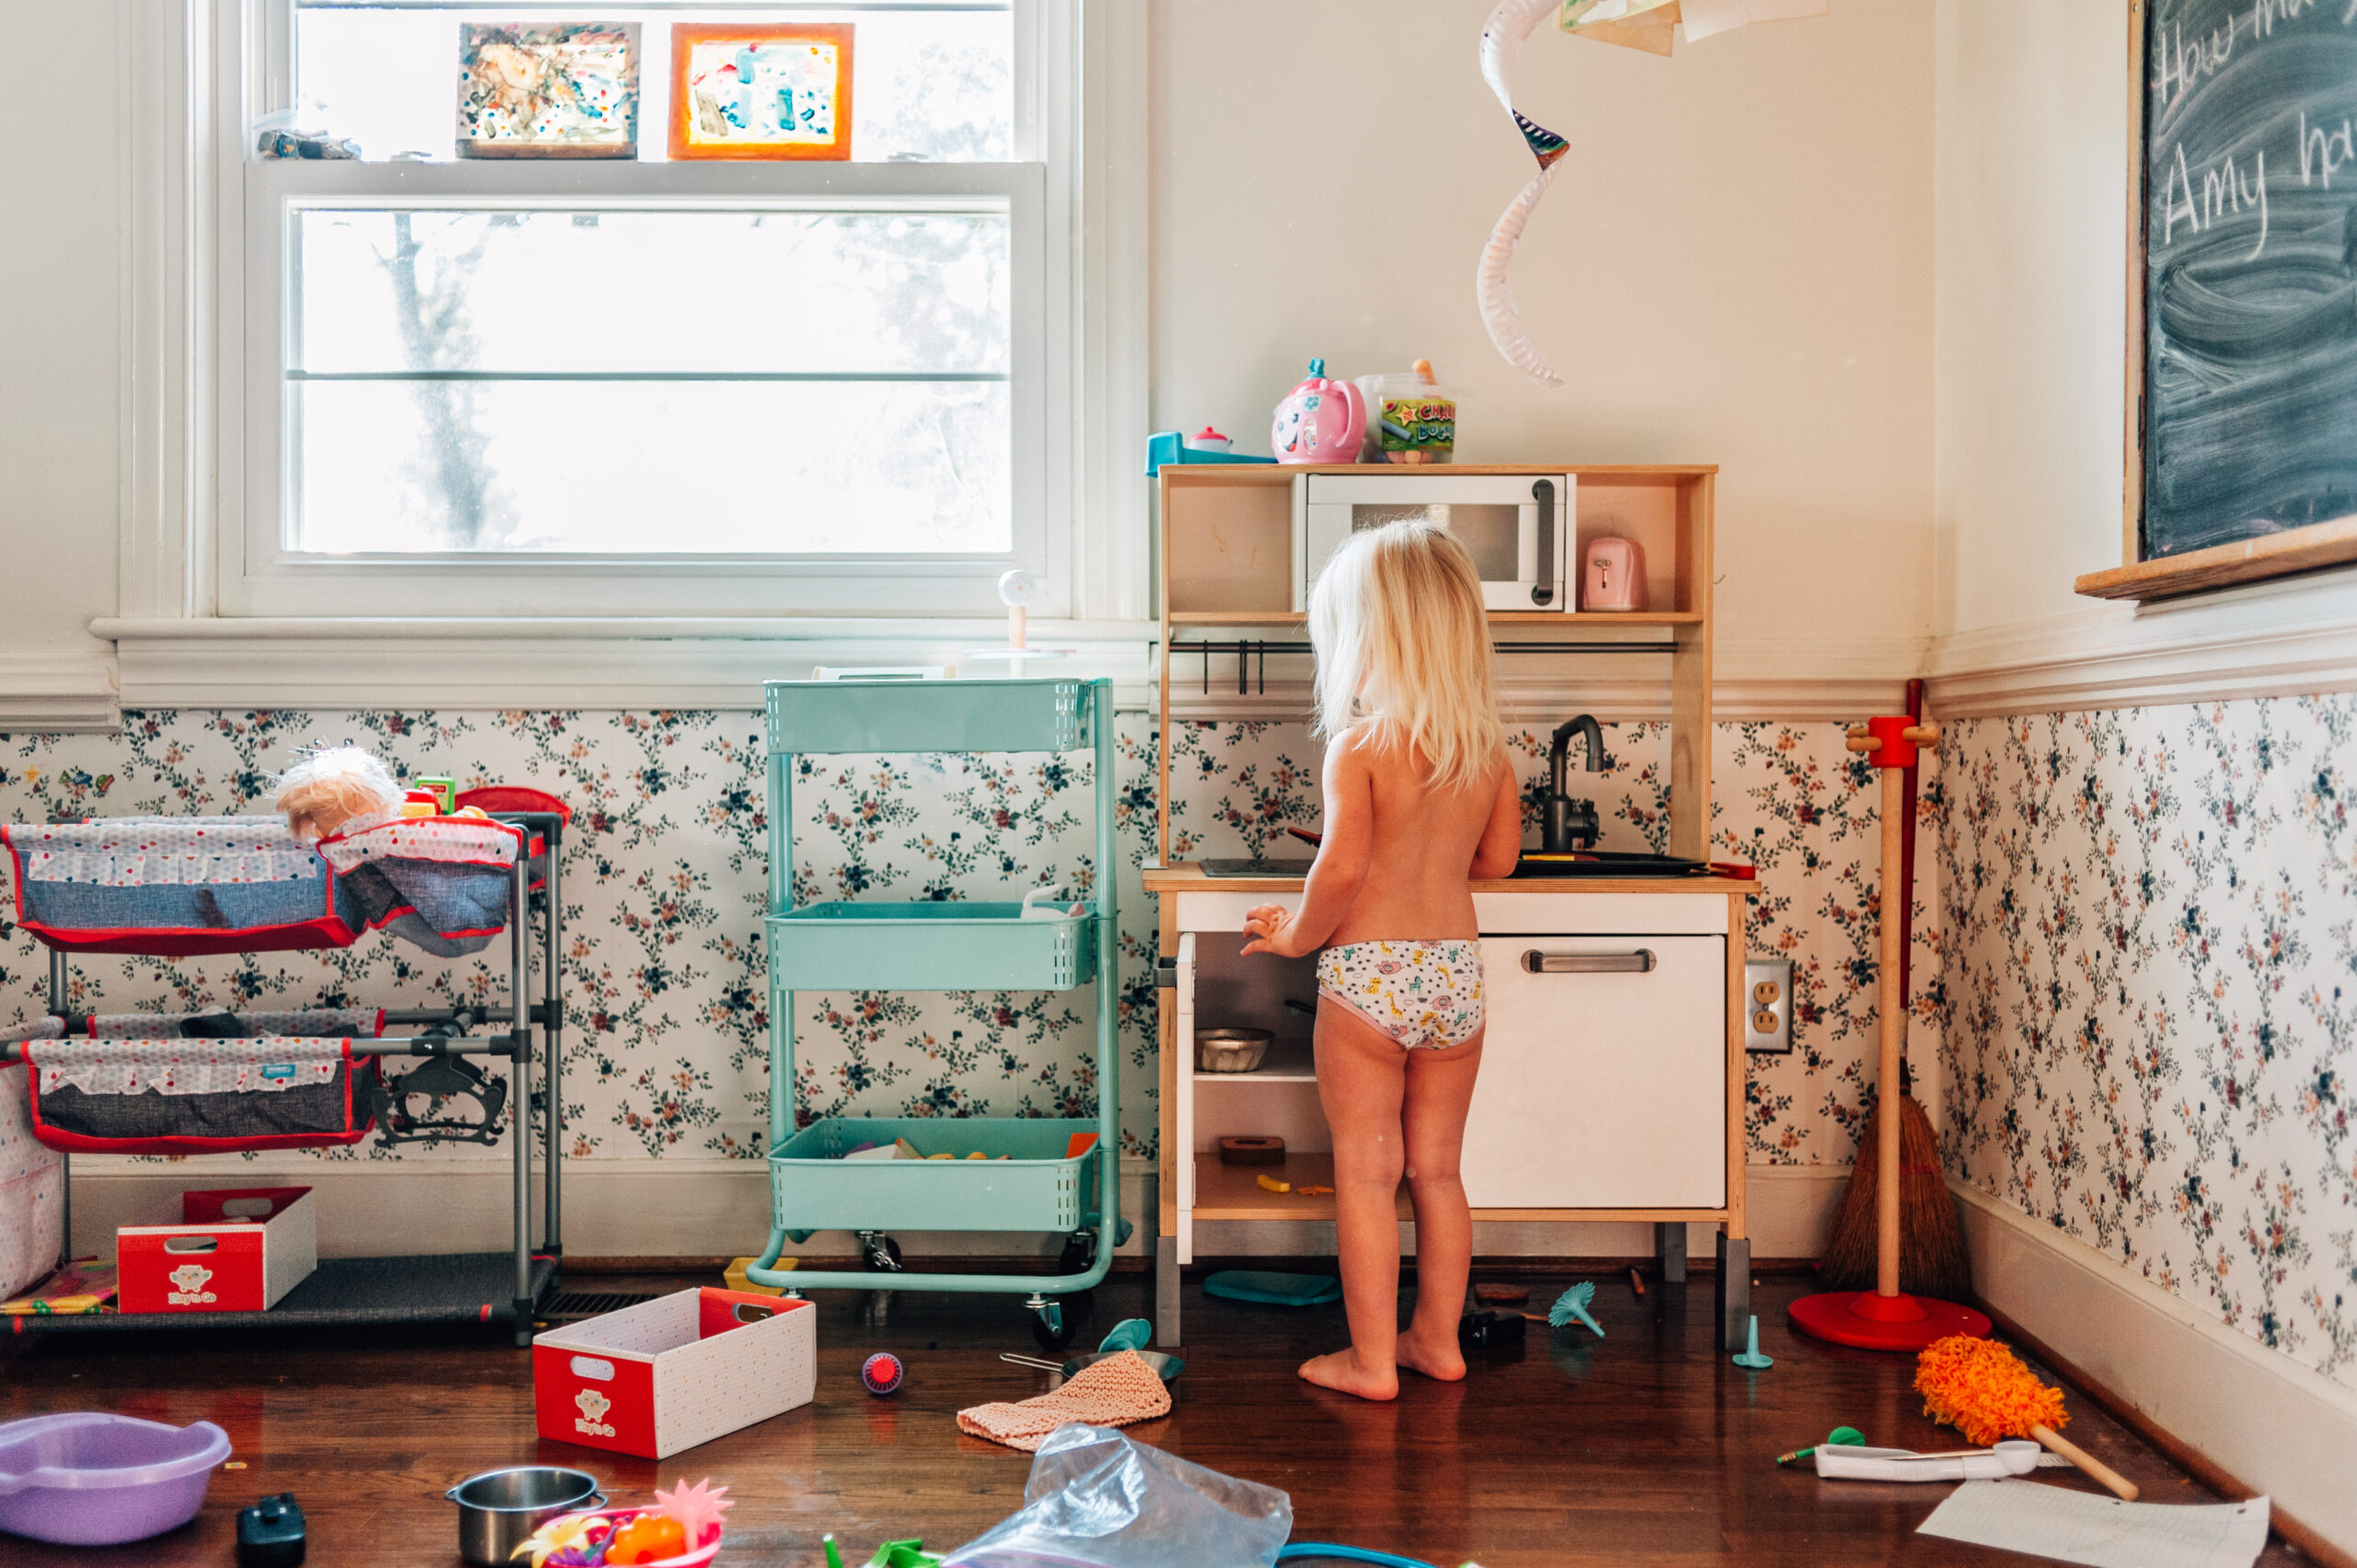 Little girl plays with toy kitchen during in-home family session with Dreama Spence.